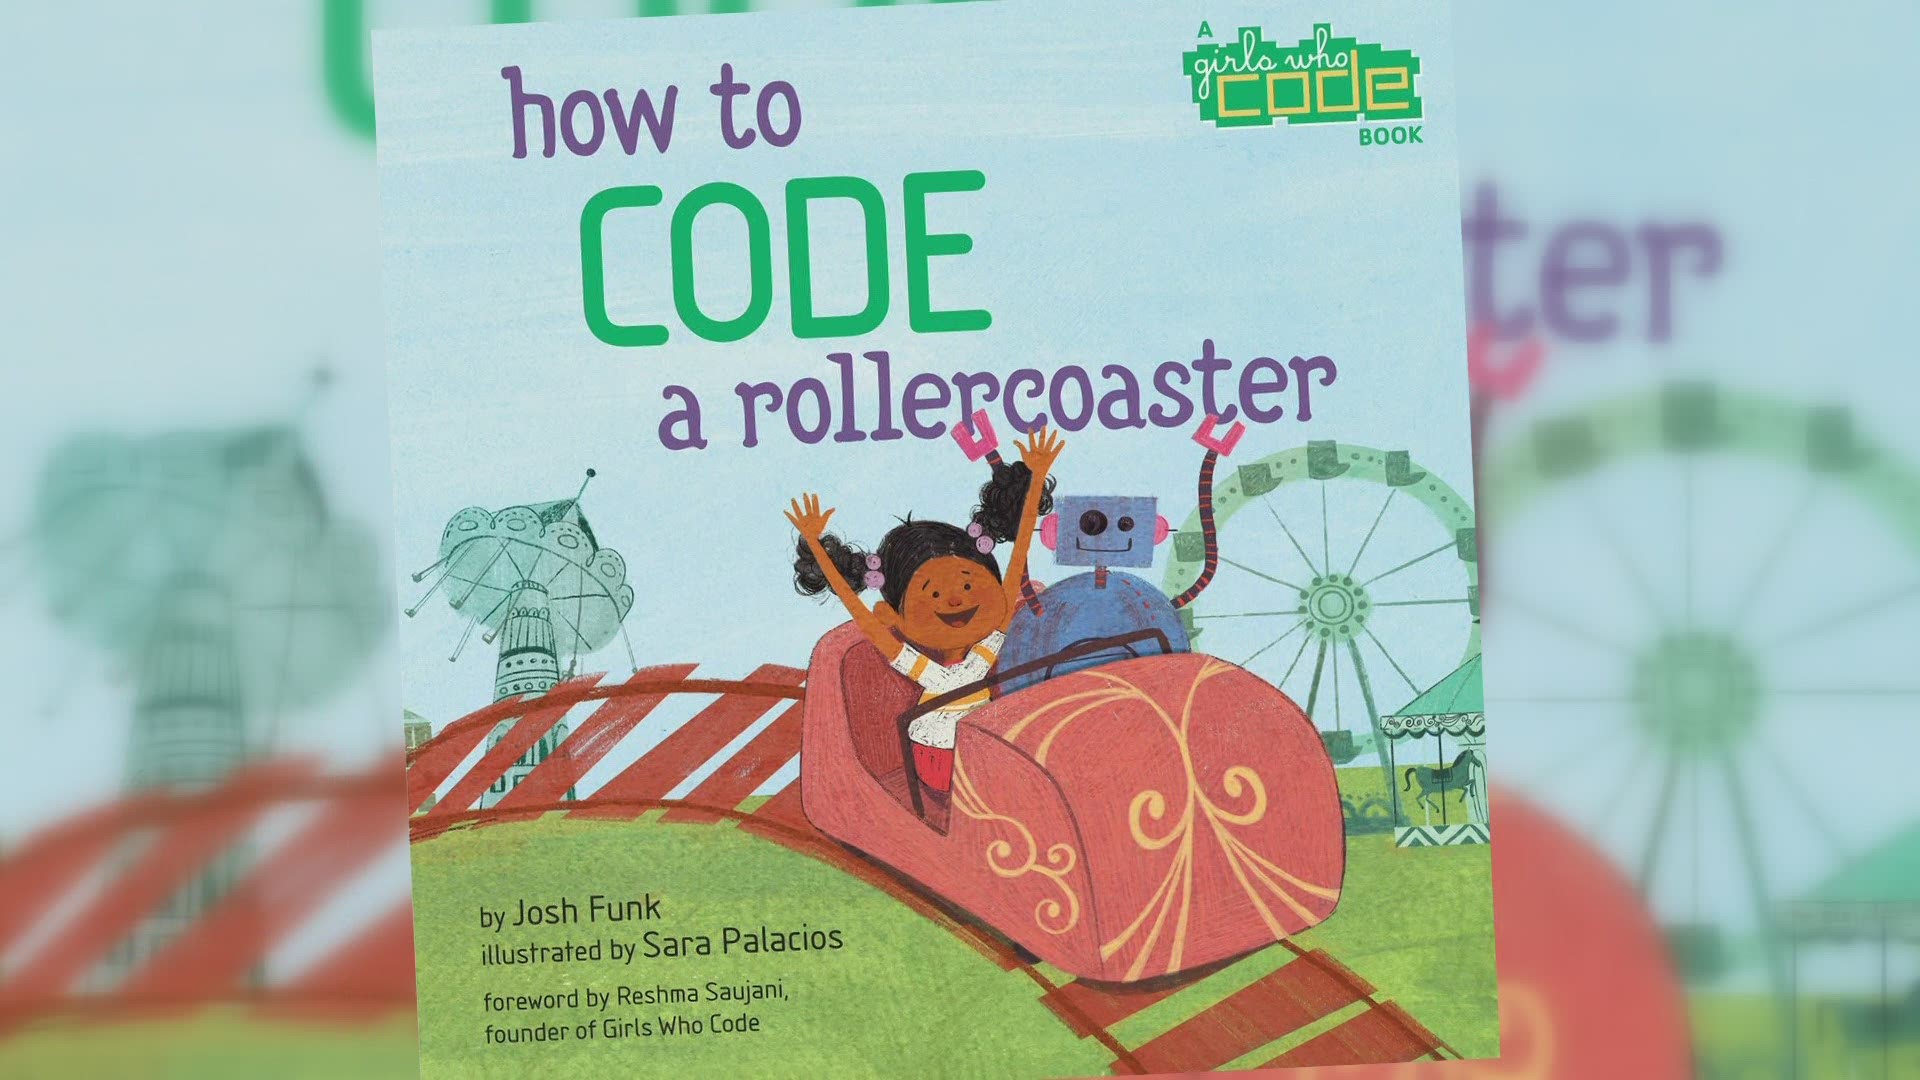 Children's books can encourage kids to be passionate about STEM.